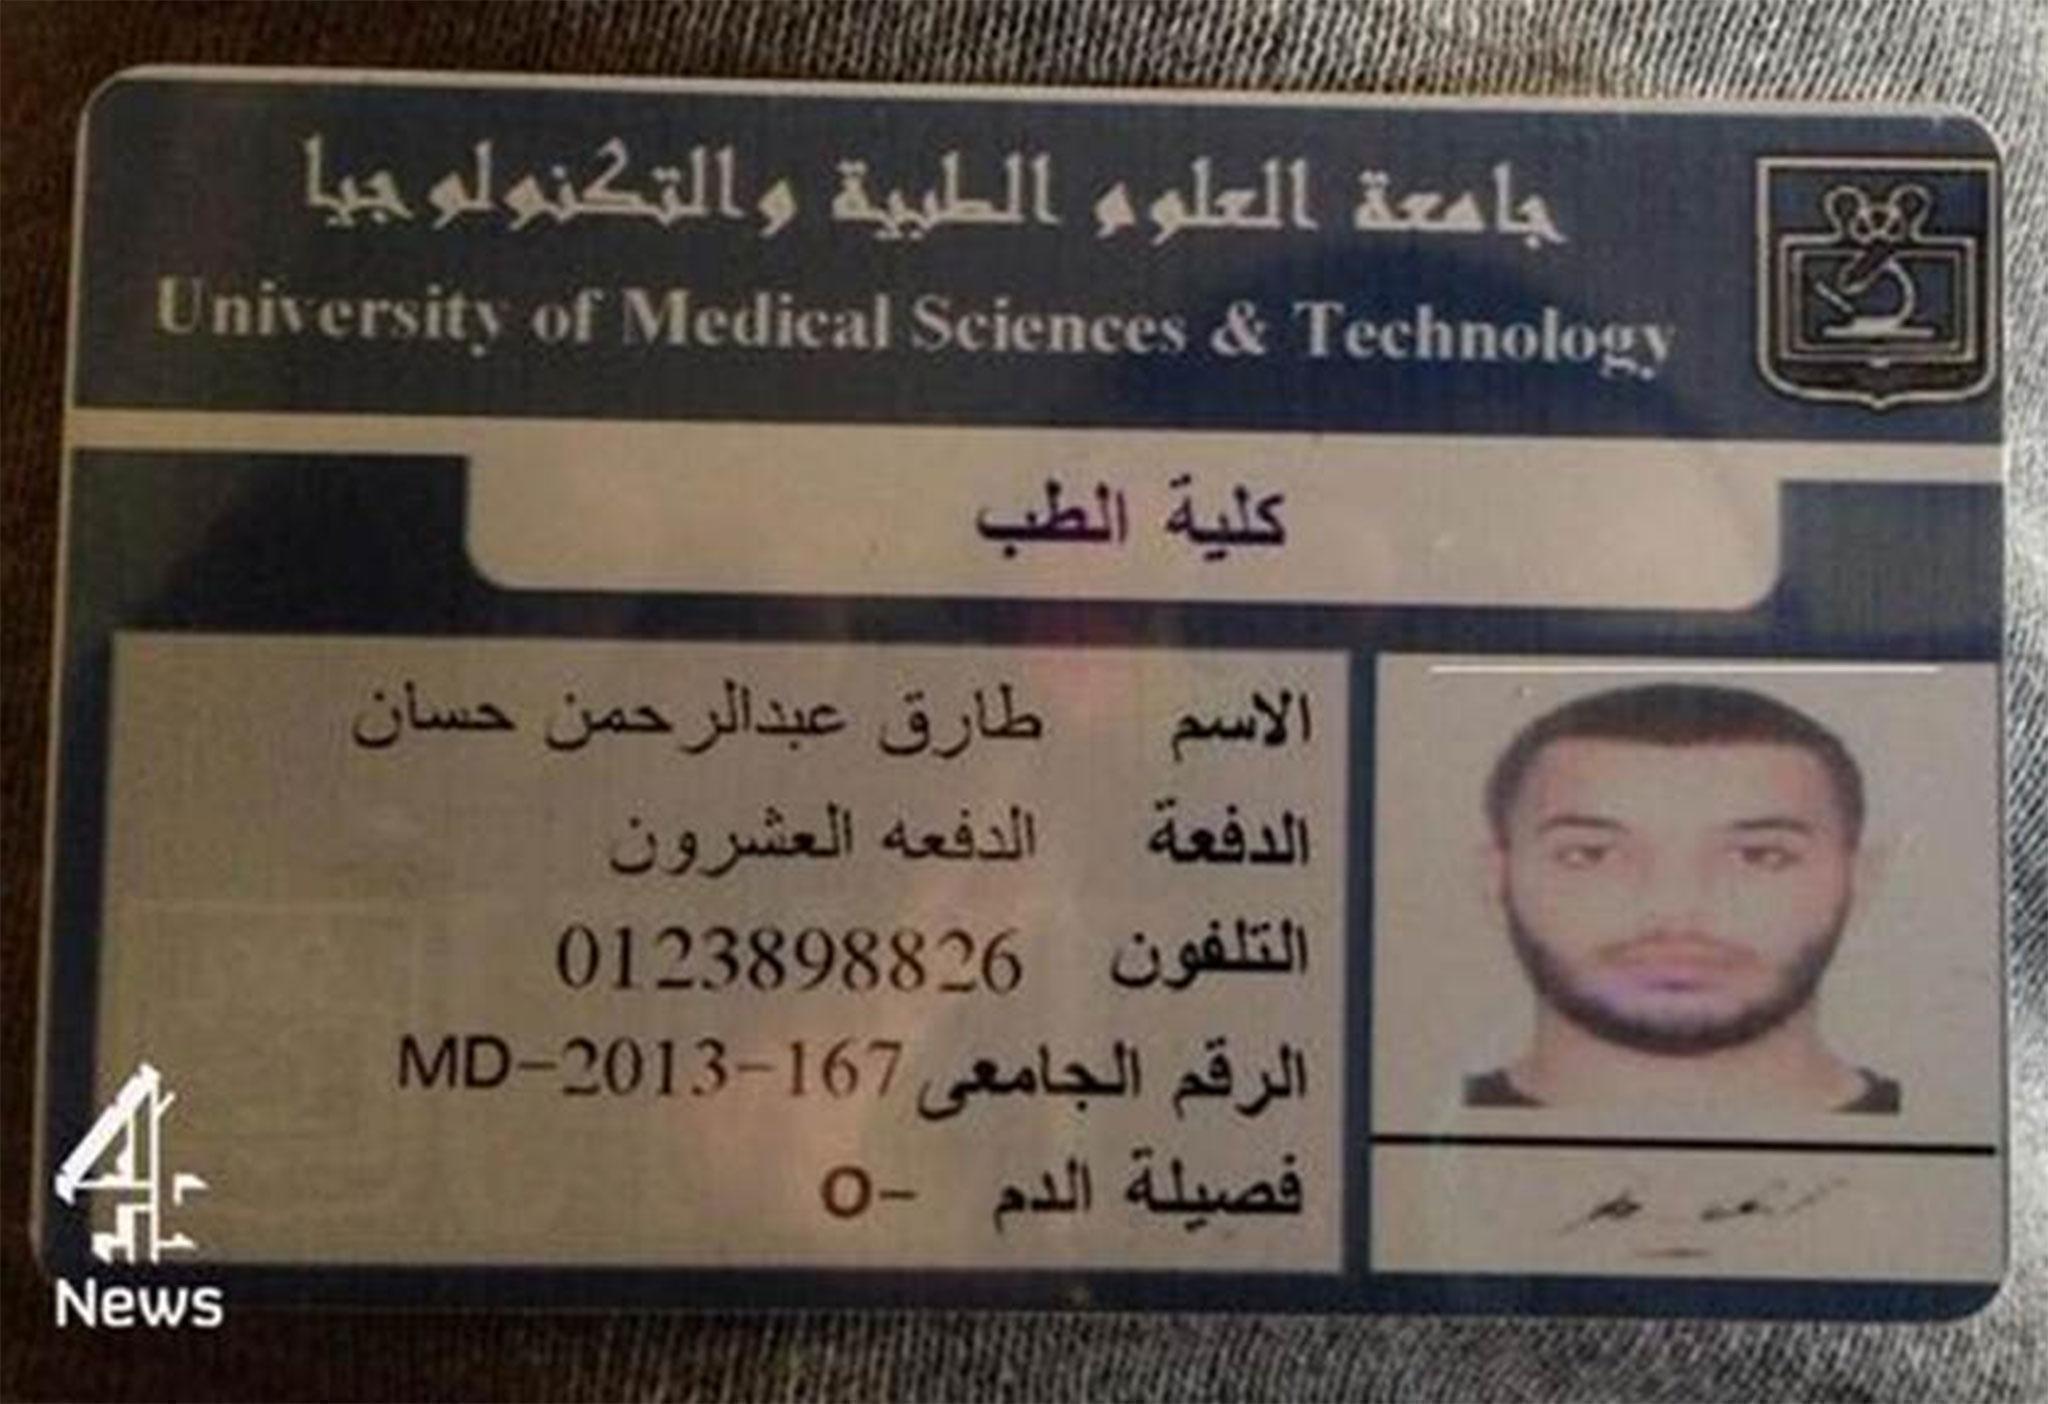 An image posted to Tarik Hassane's Twitter profile appearing to show his student ID for a Sudanese university